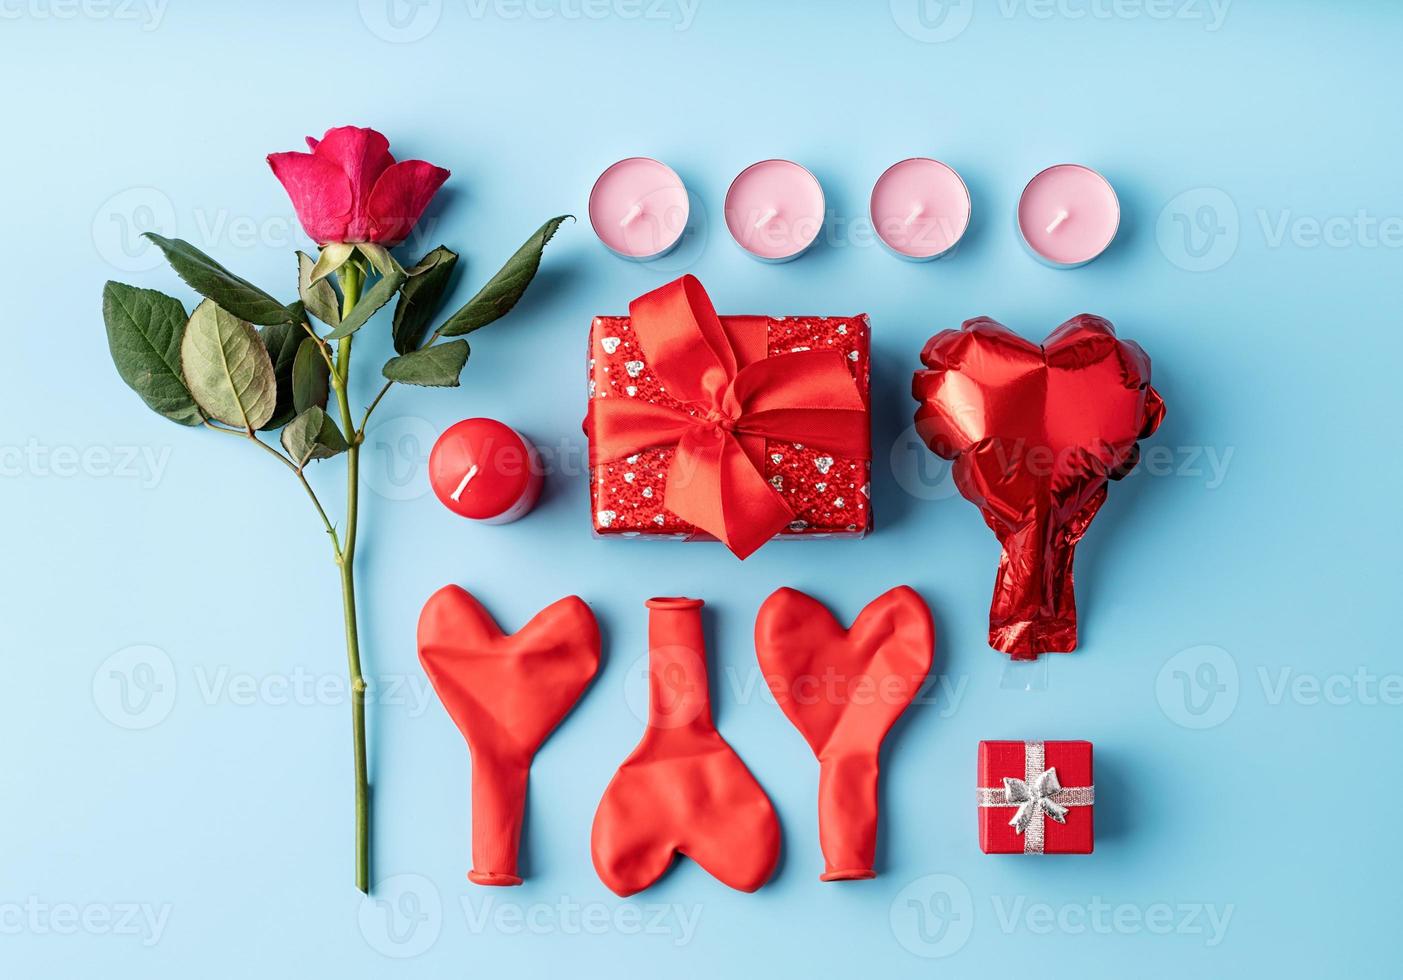 Valentines Day knolling objects decorated on blue background photo